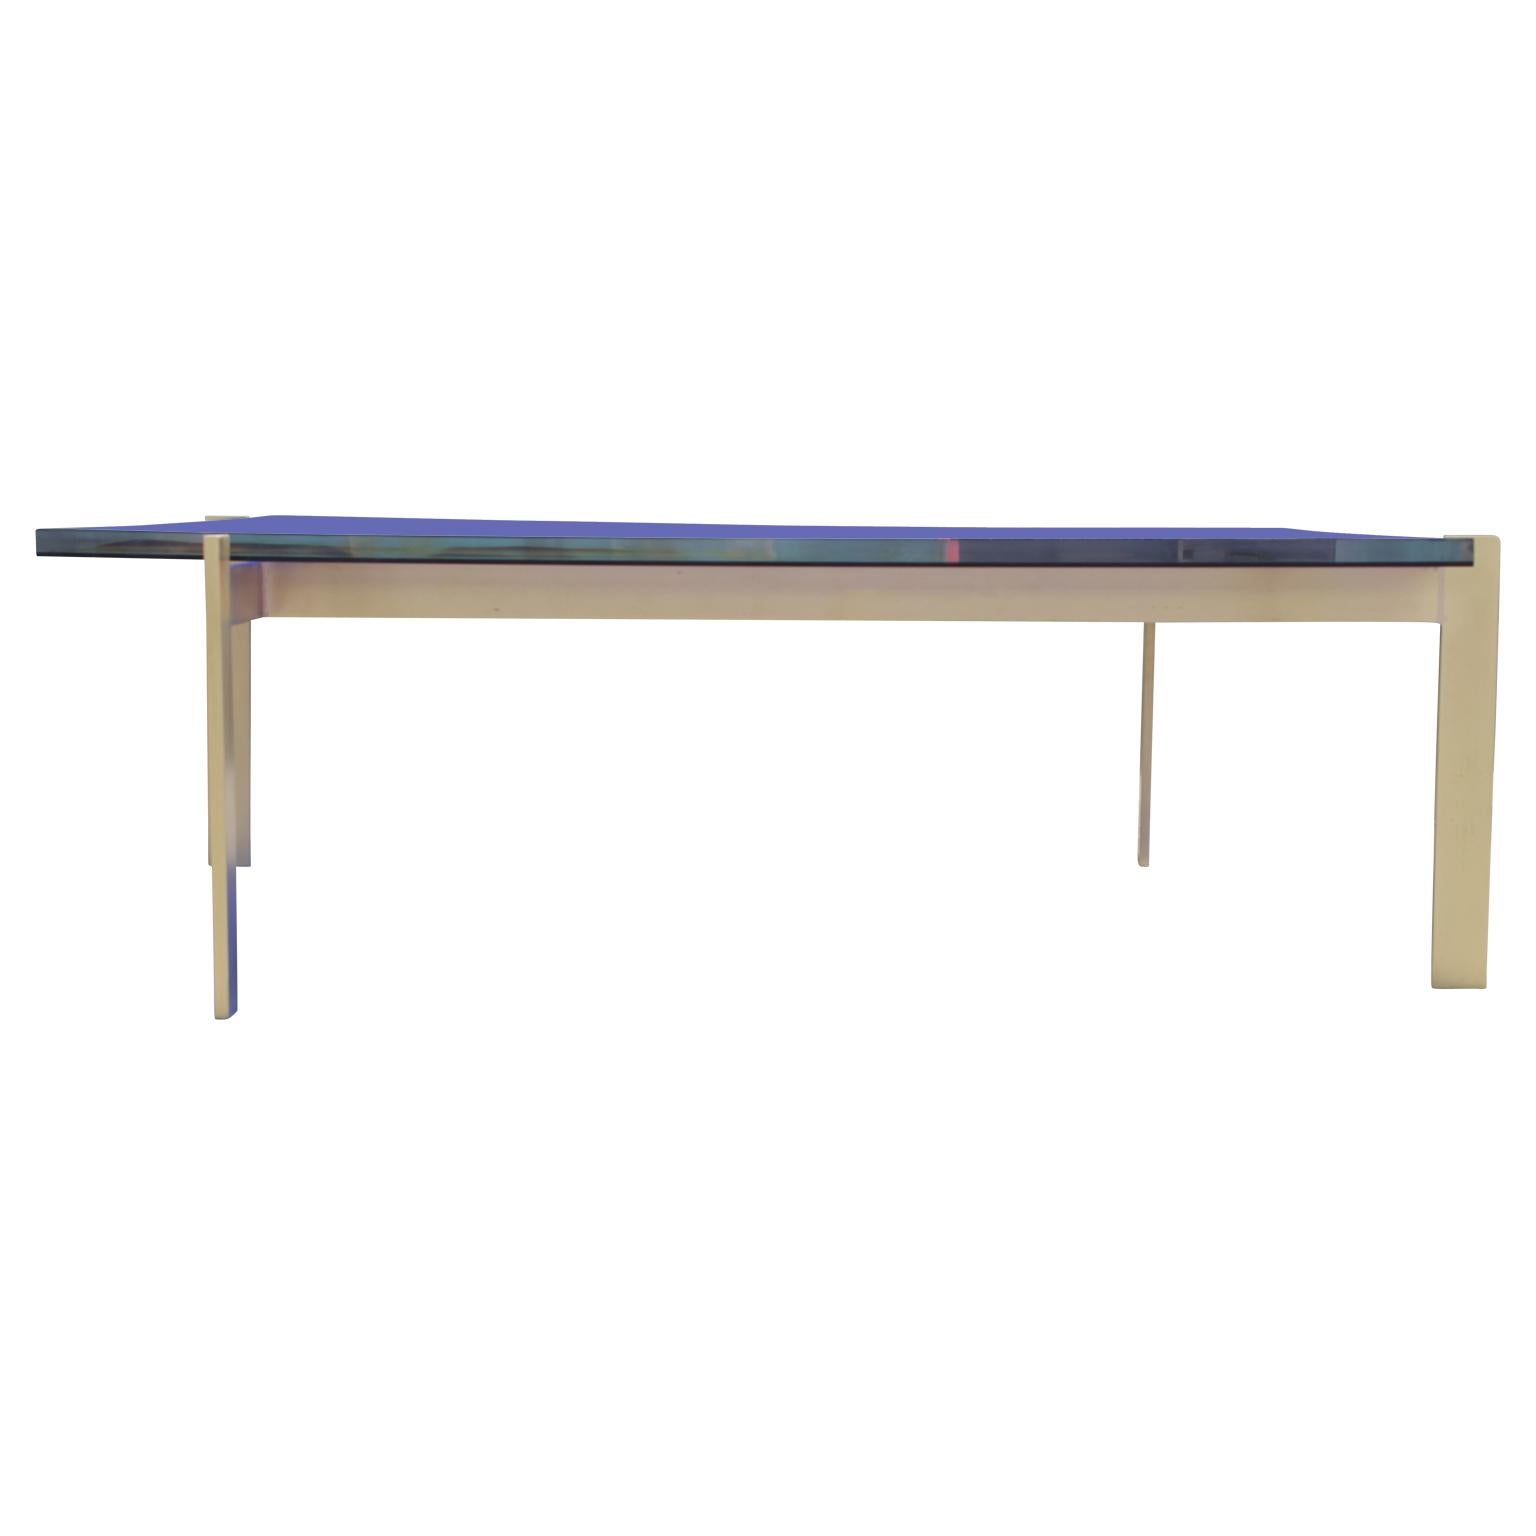 American Modern Custom Blue Lucite or Acrylic and Solid Brass Square Coffee Table